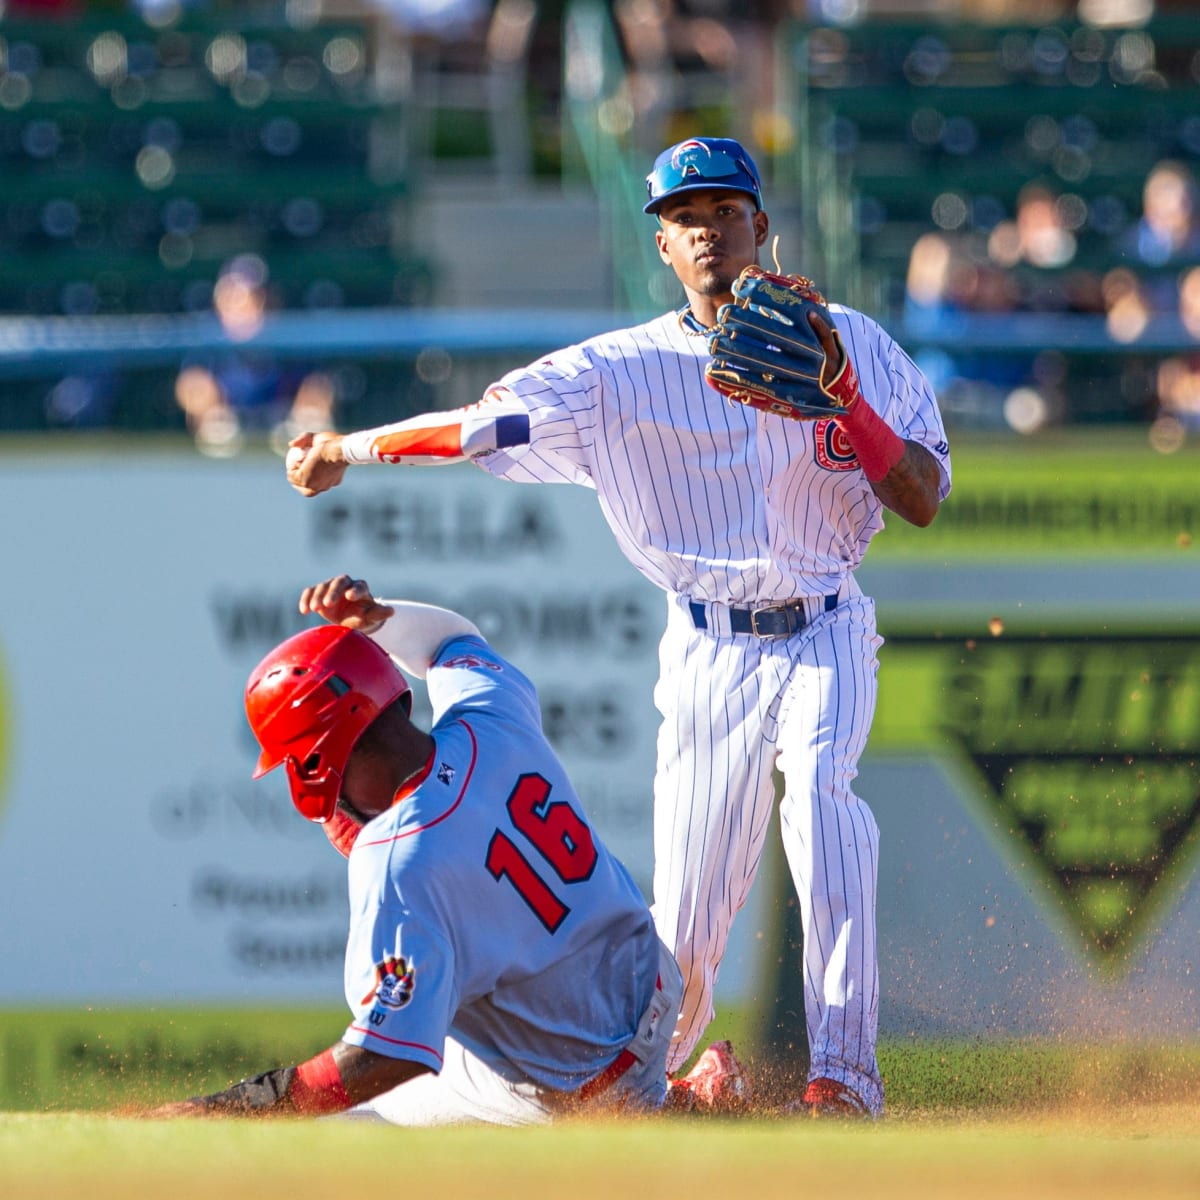 Chiefs at Cubs Live Stream Minor League Baseball Online Free - How to Watch and Stream Major League and College Sports